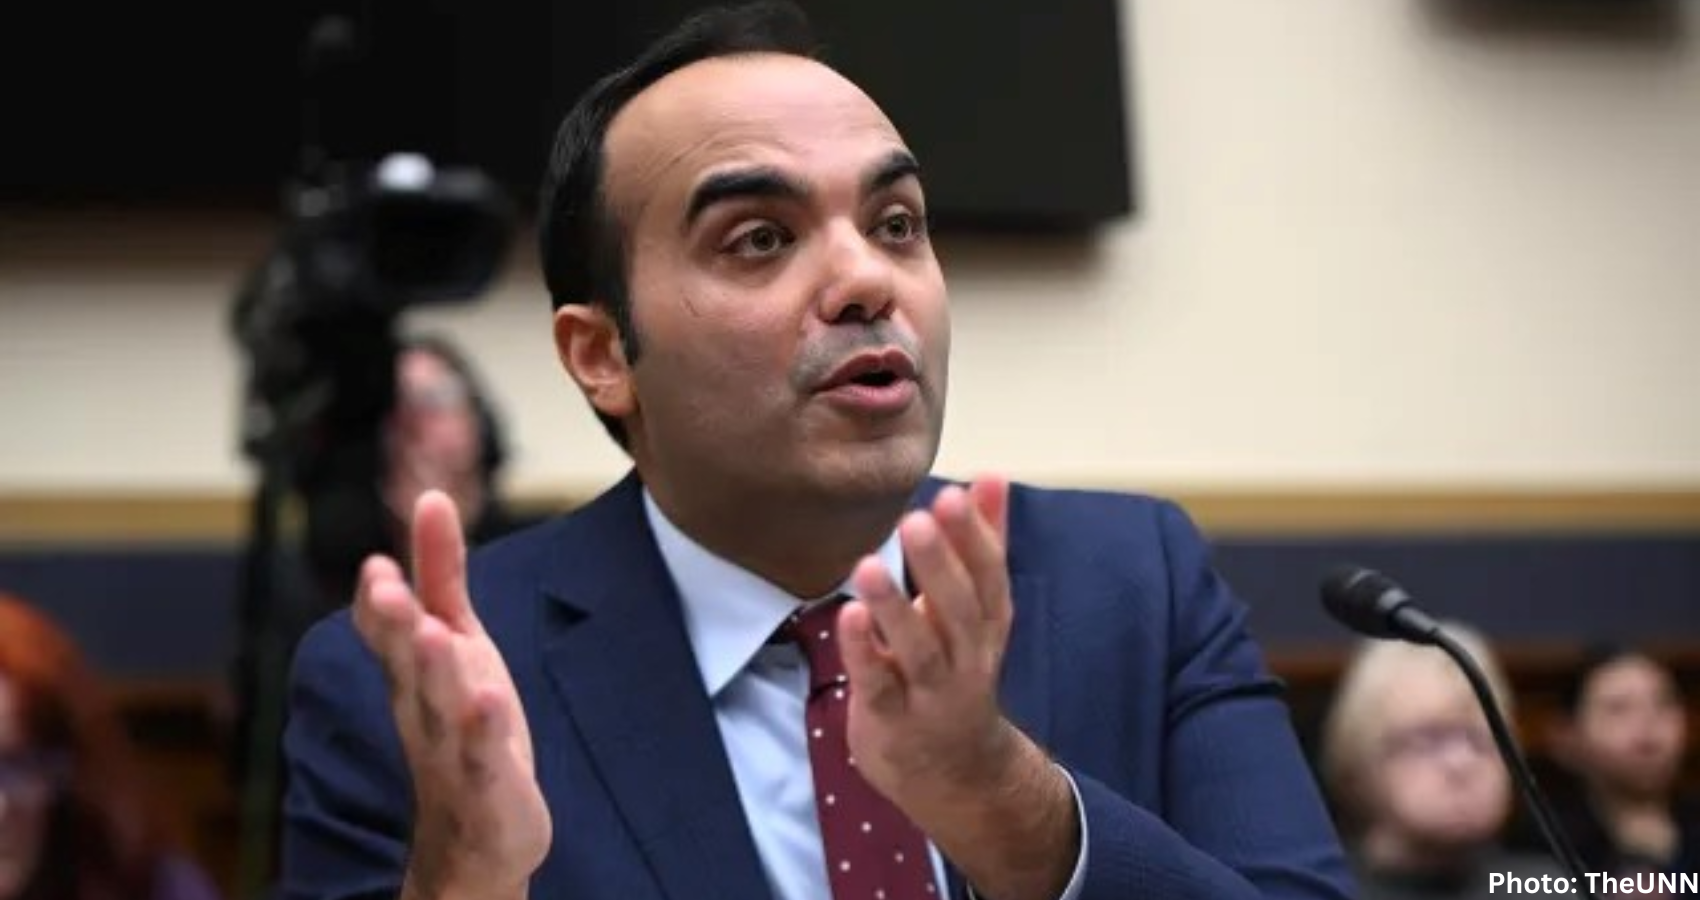 Feature and Cover CFPB Director Rohit Chopra Announces corporate ‘repeat offender’ registry